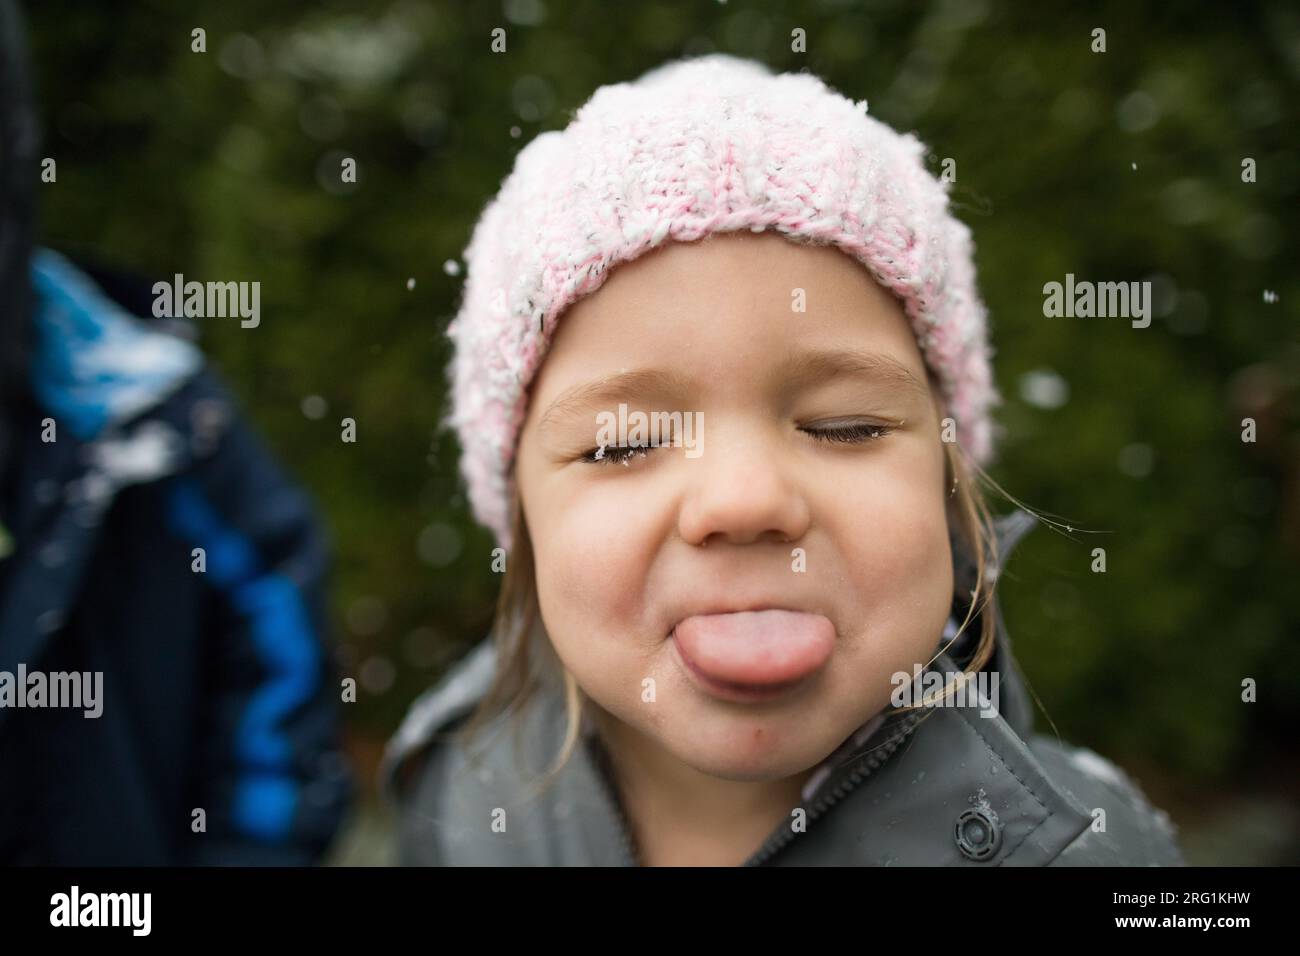 Young girl catches snowflakes with her tongue outside. Stock Photo